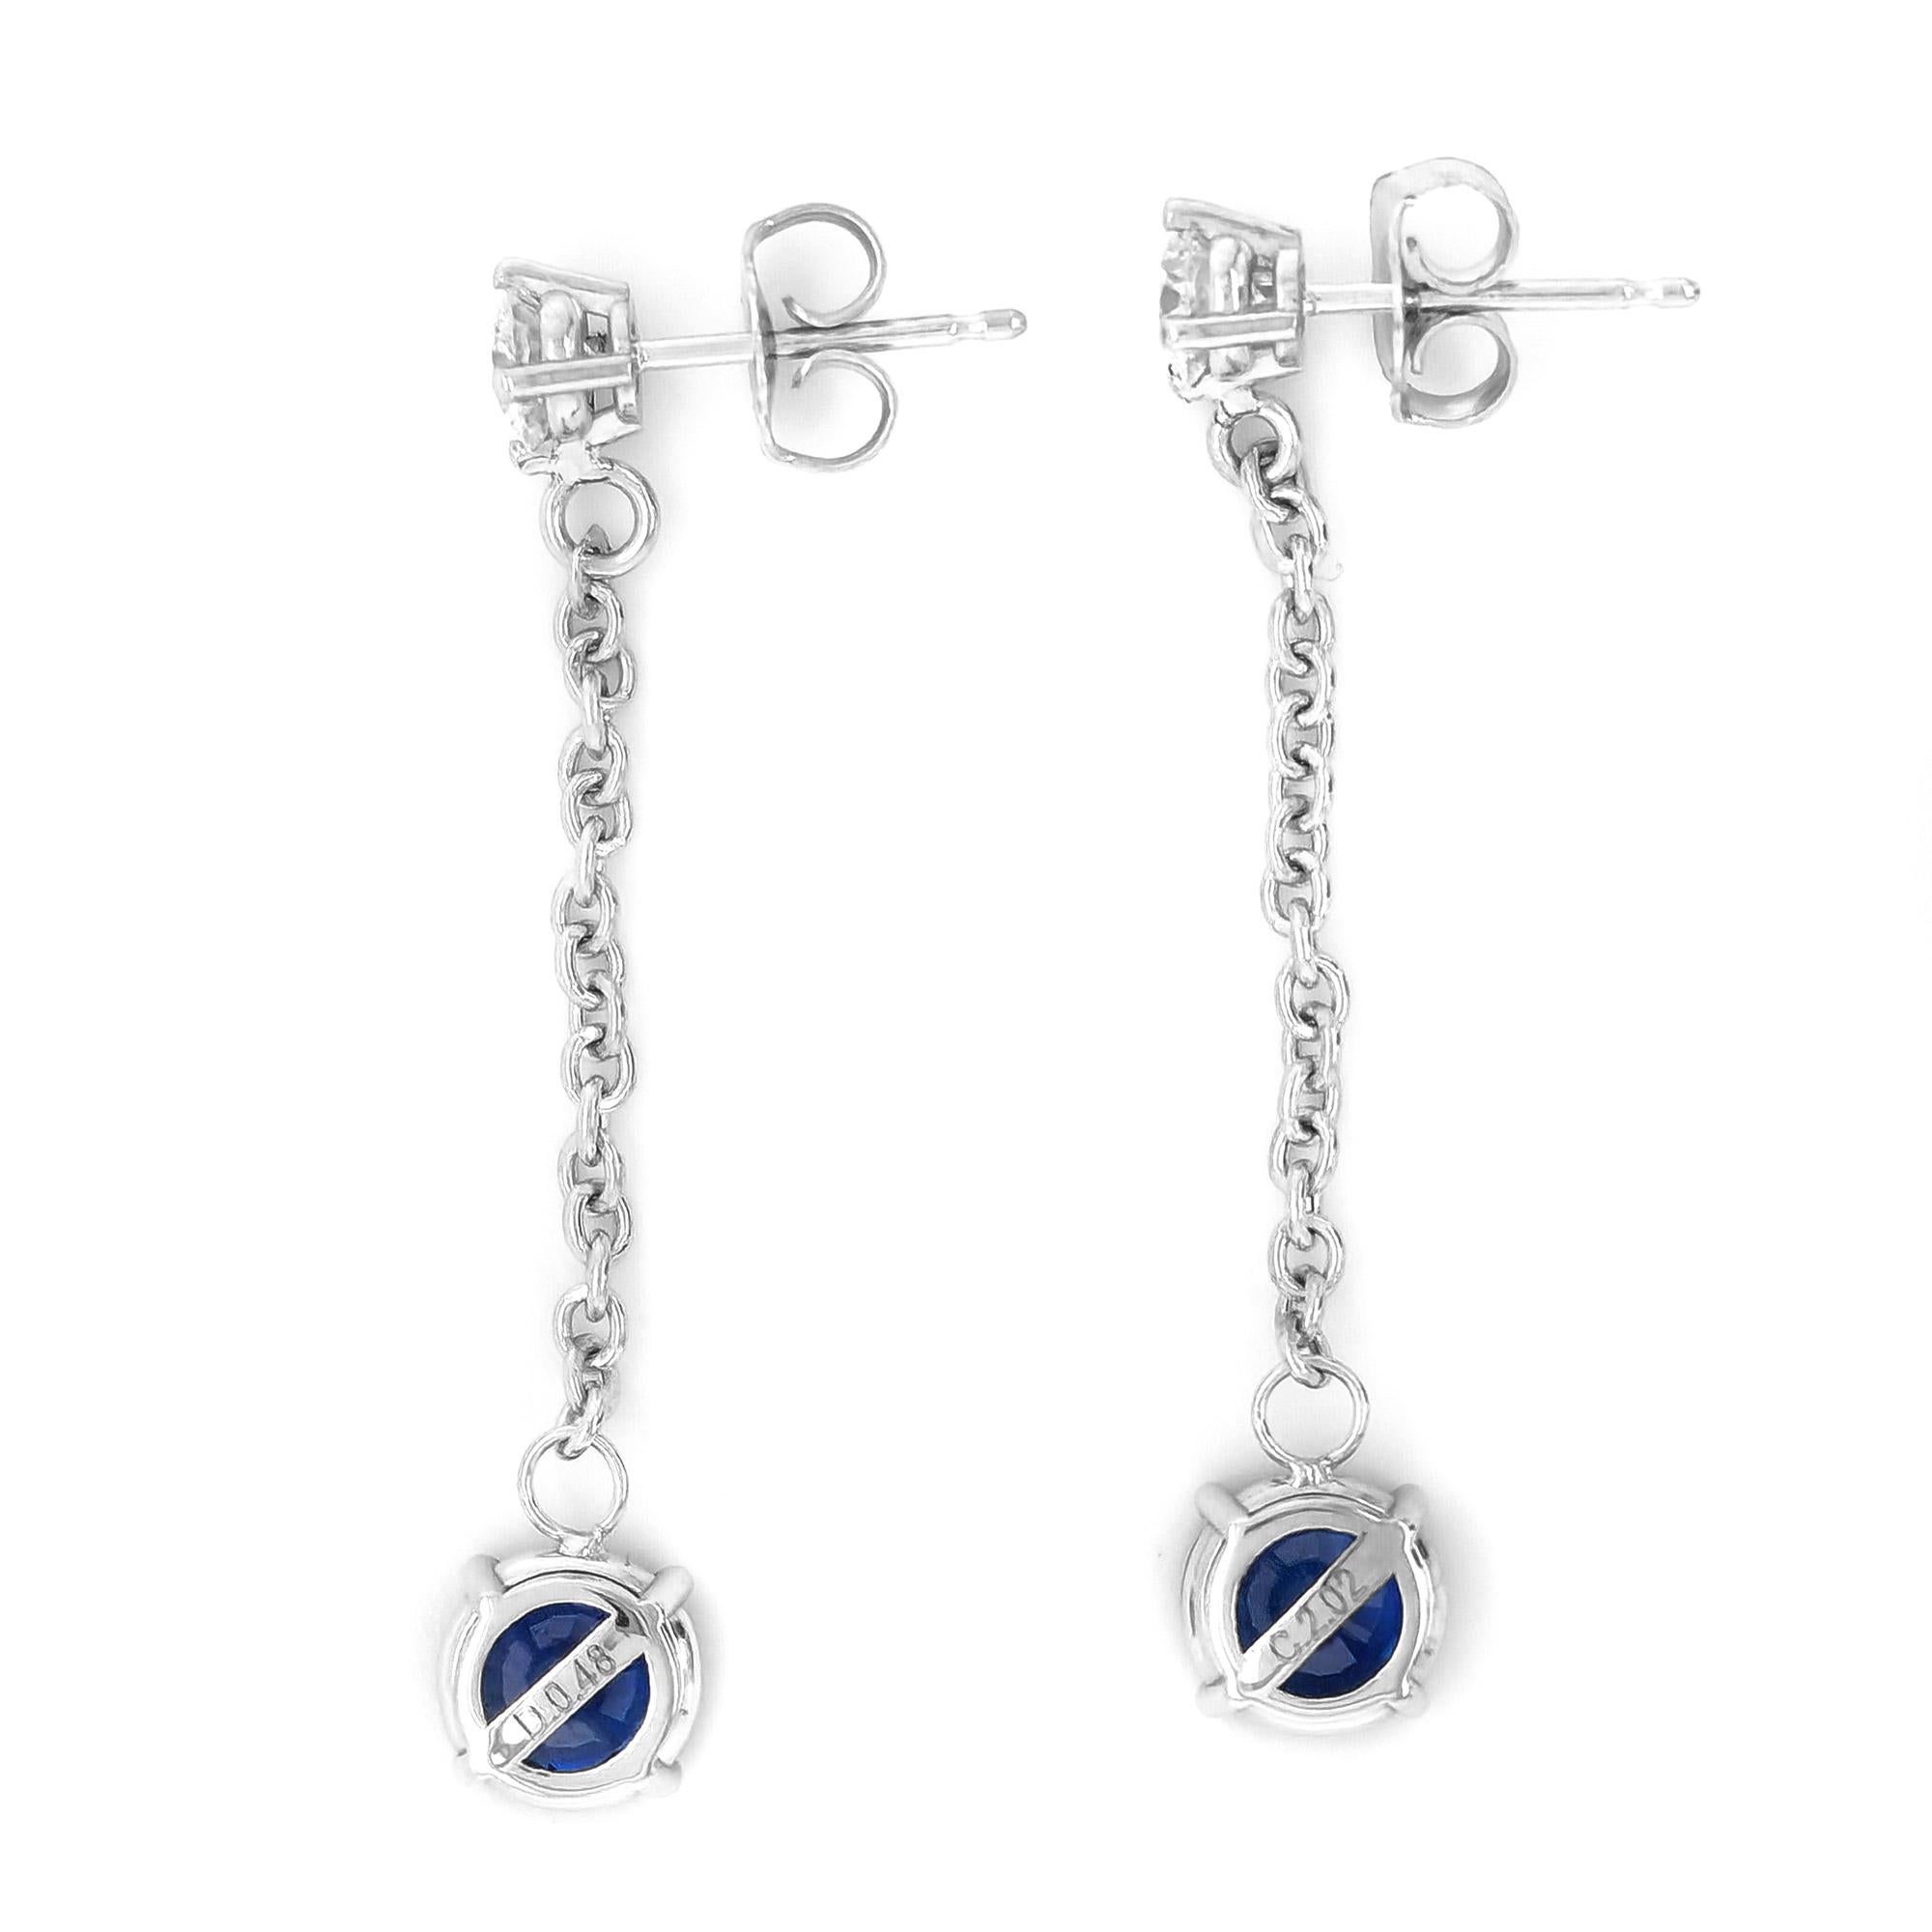 Discover the allure of our 'Eyes of the Ocean' Rare Blue Sapphire Earrings, a mesmerizing fusion of nature's beauty and exquisite craftsmanship. These earrings boast 2.02 carats of rare blue sapphires, delicately nestled in a beautifully textured